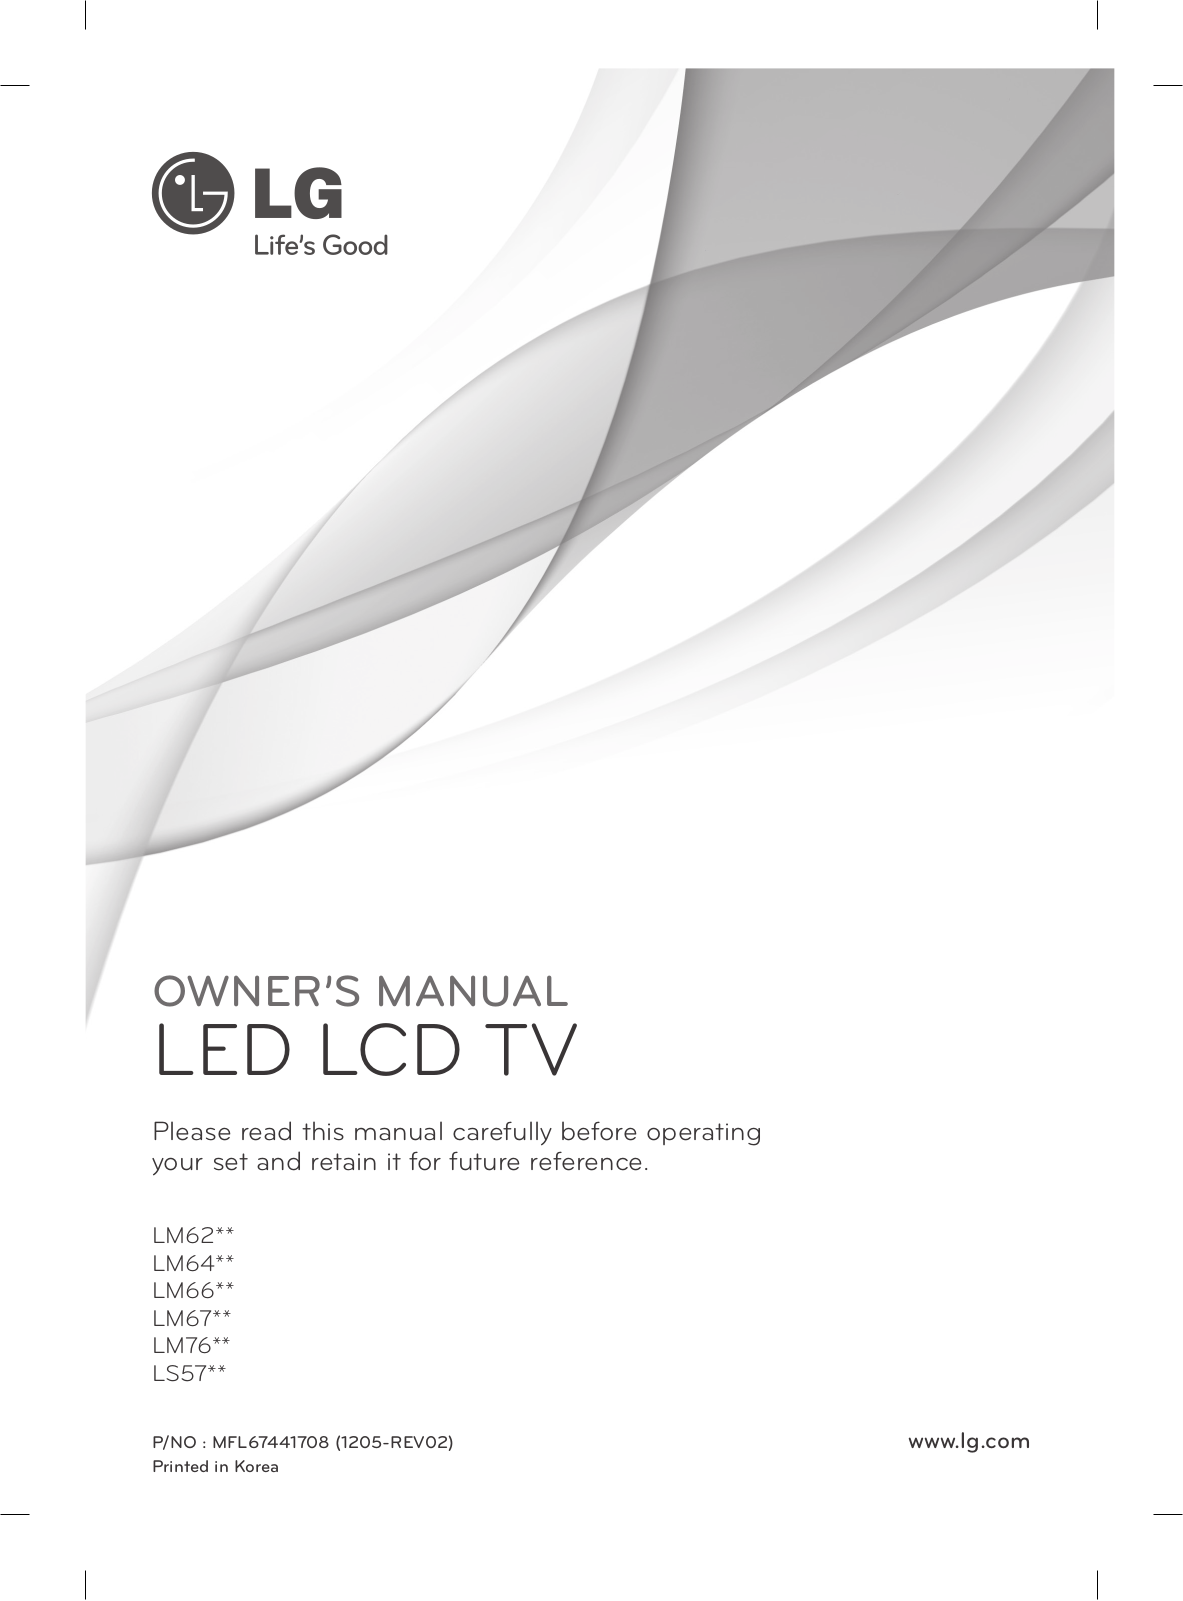 LG 42LM640T, 47LM620T, 55LM670T, 55LM660T, 47LM669T User Manual